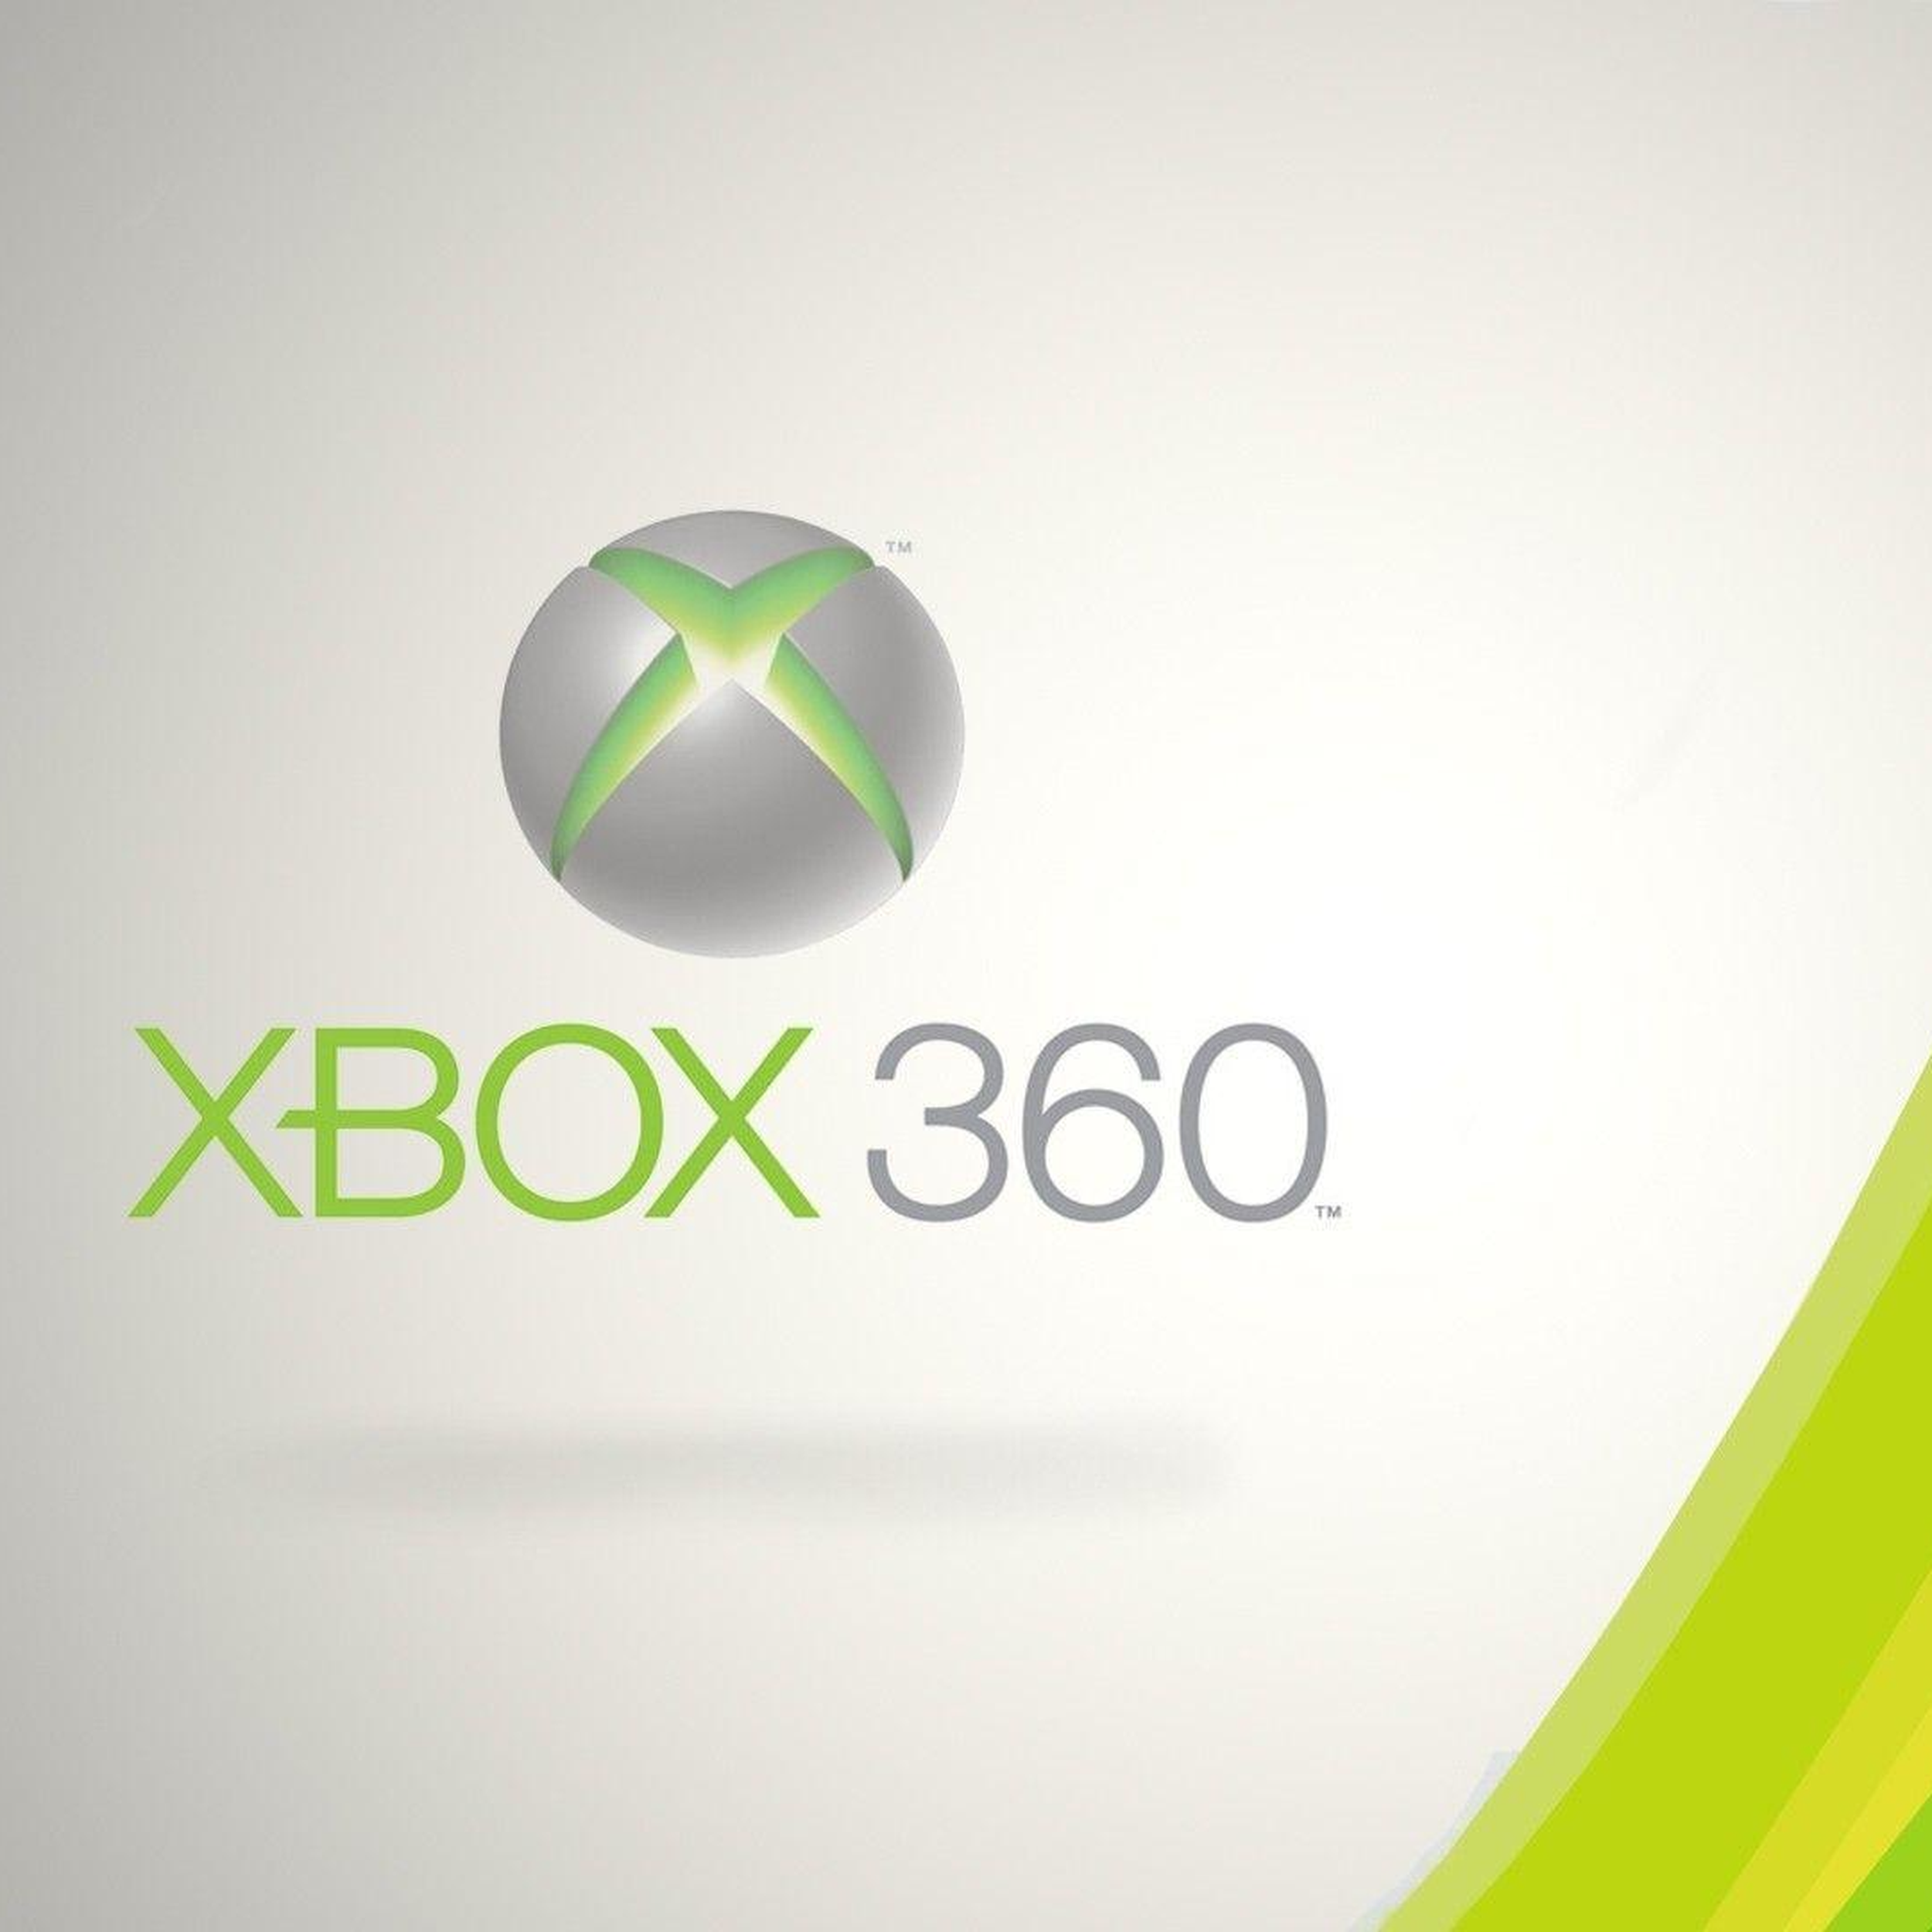 Digital Preservation for Xbox 360 should be better. : r/xbox360